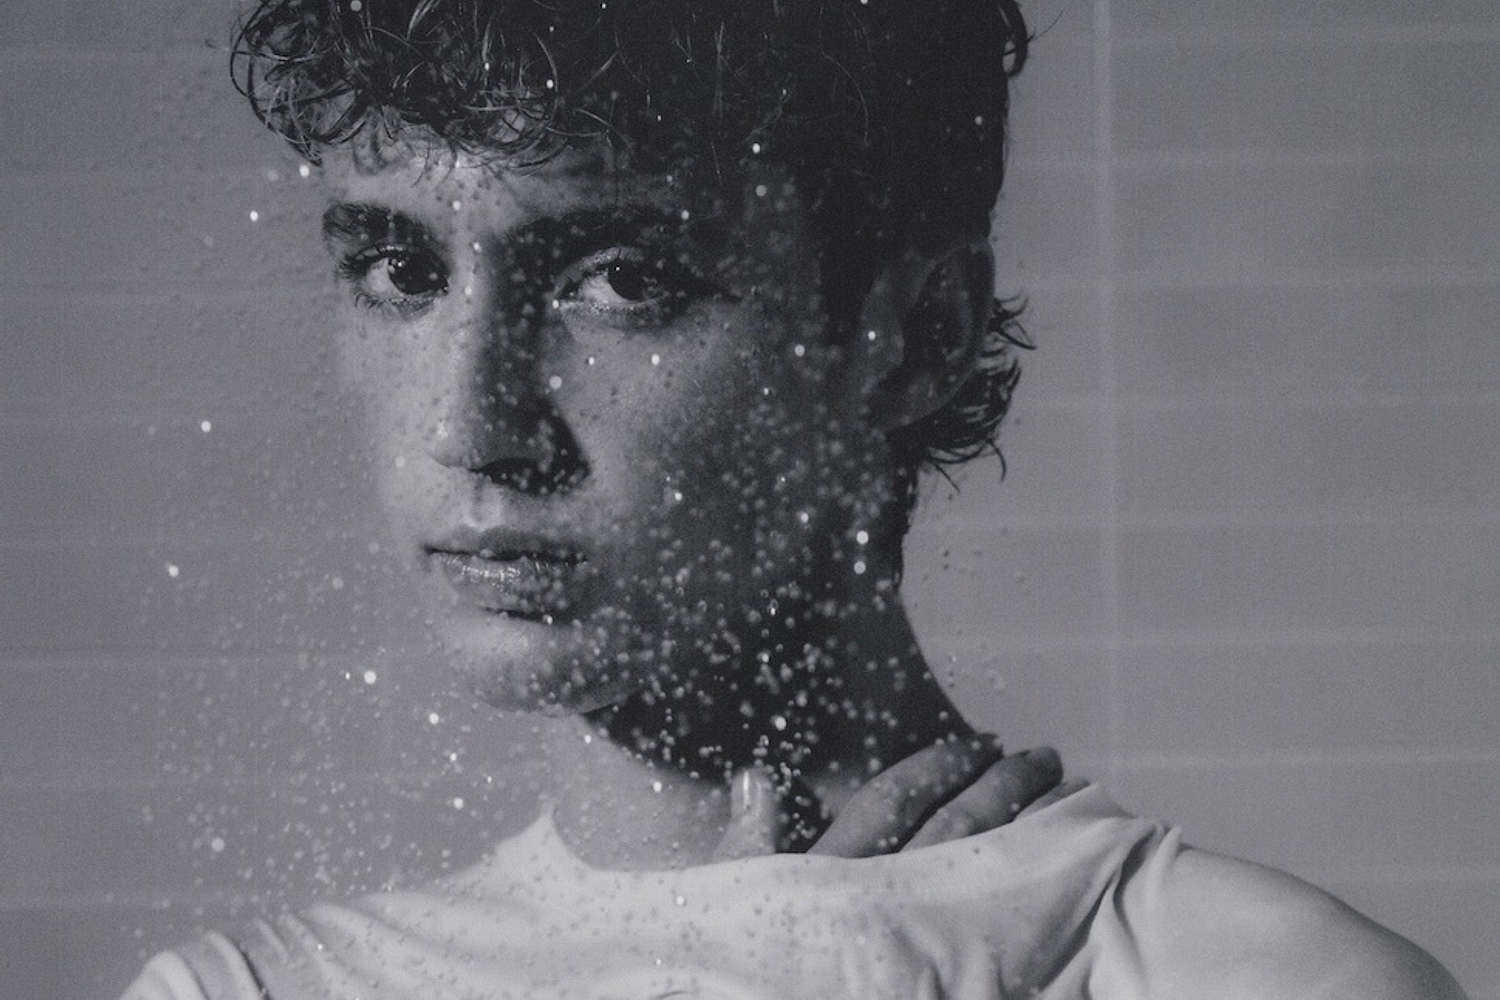 Troye Sivan unveils the video for ‘Angel Baby’